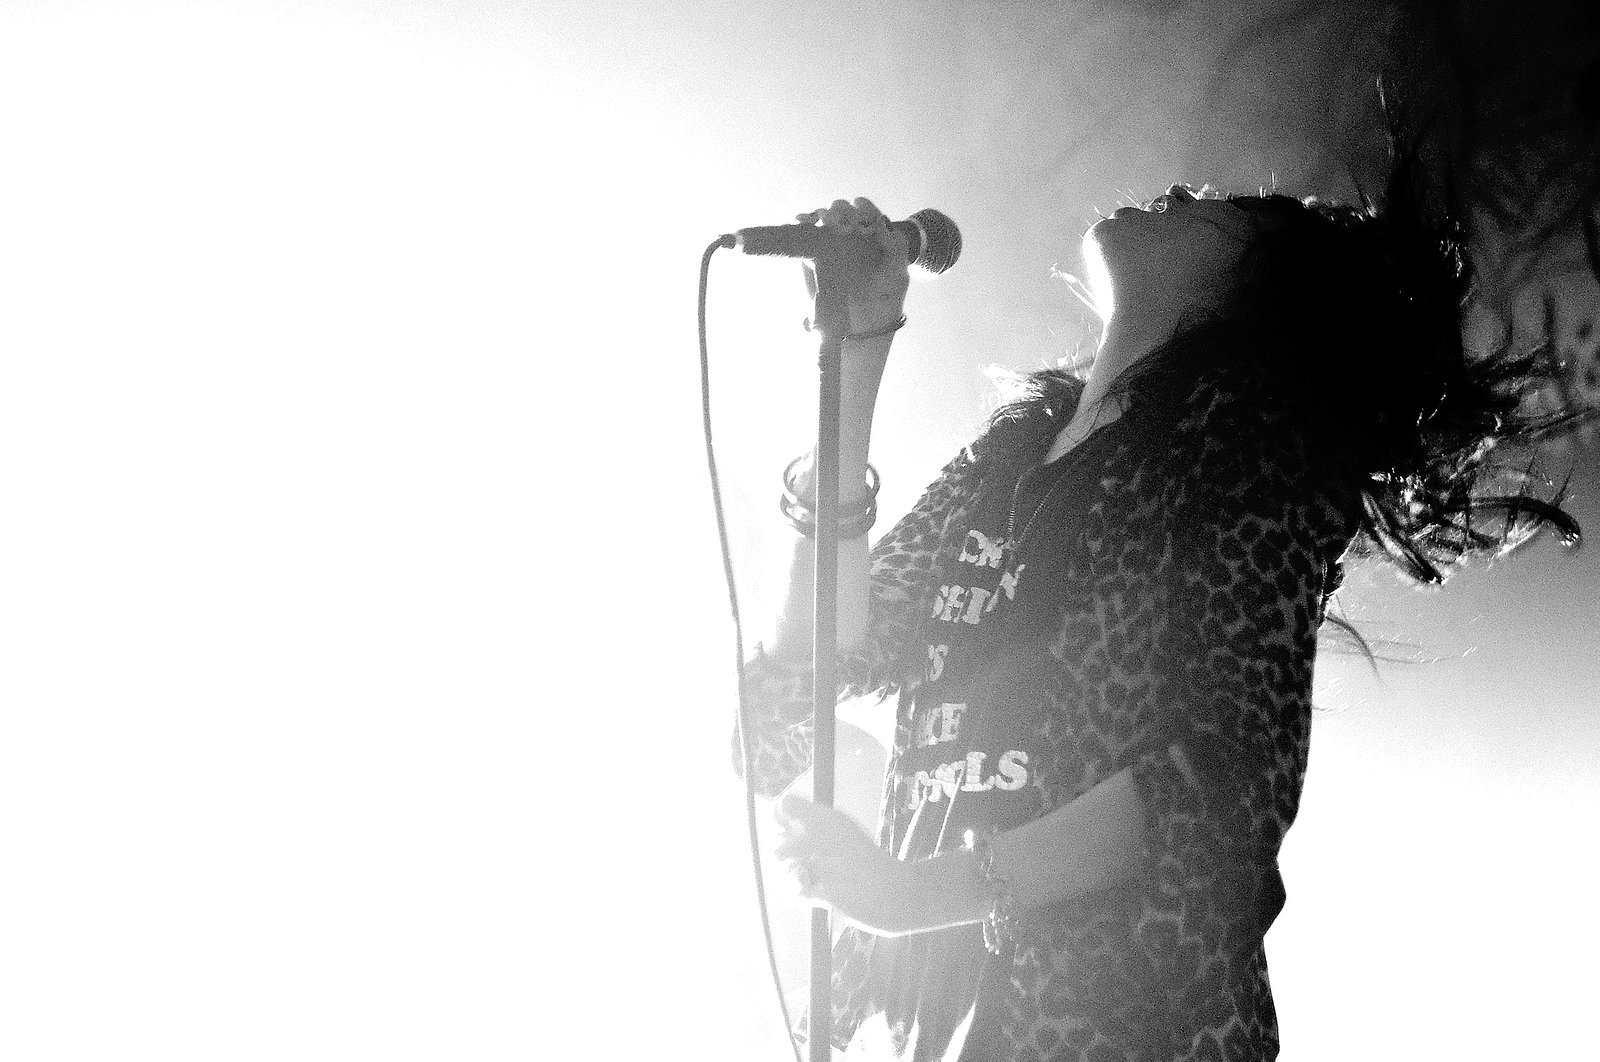 Alison Mosshart - The Dead Weather 2010